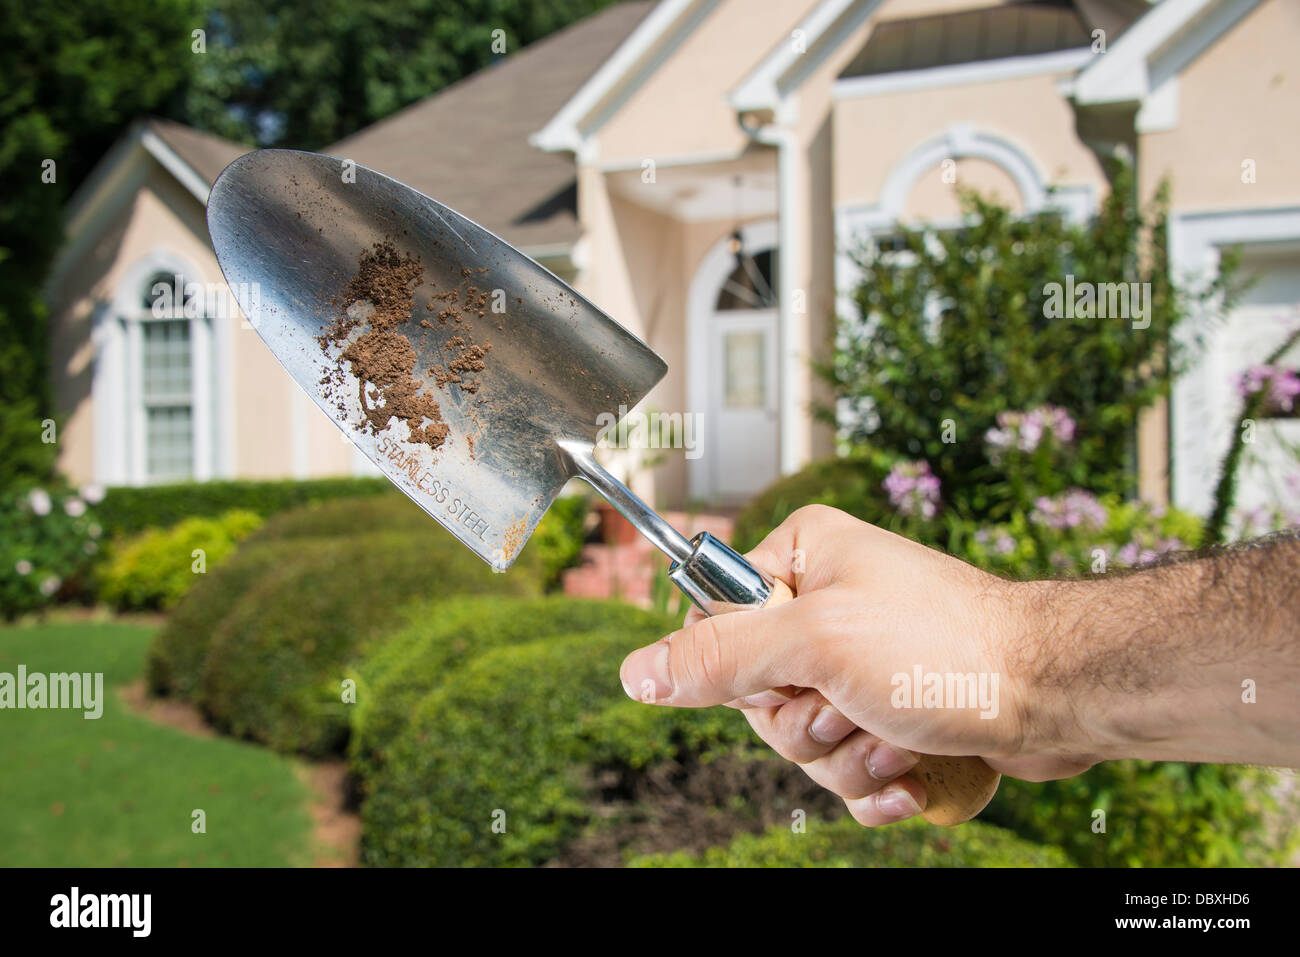 Man's hand holding dirty gardening spade in front of a home's front lawn. Stock Photo